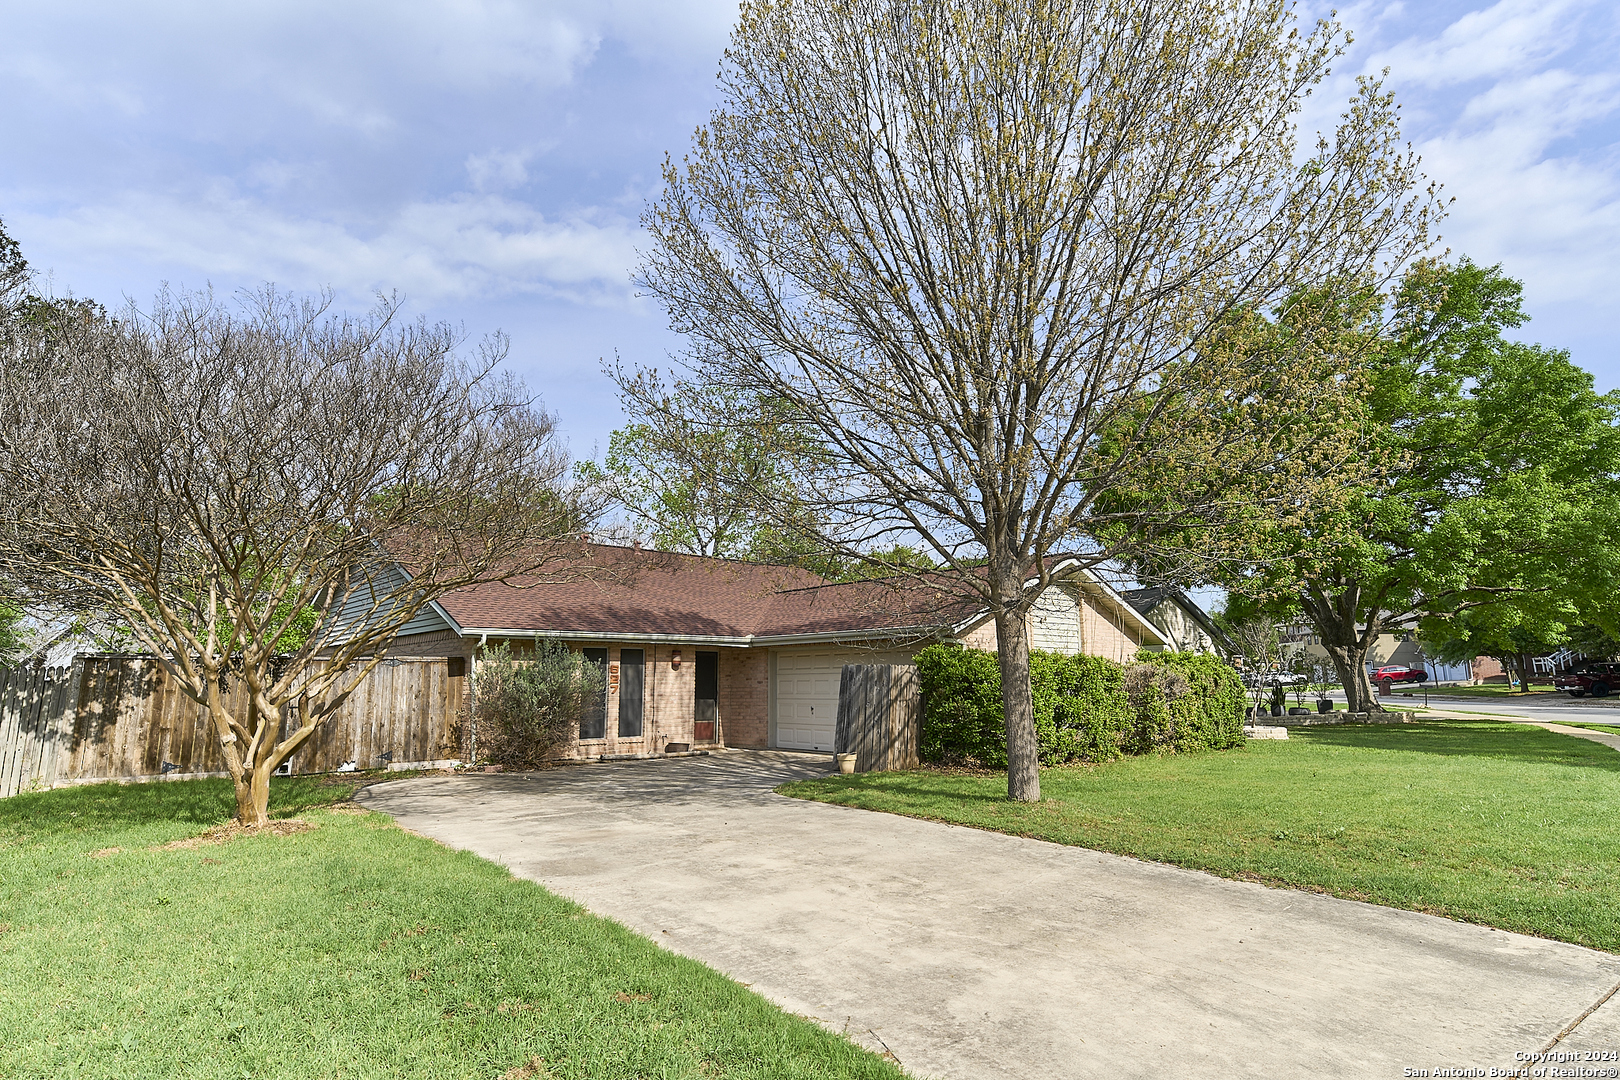 Photo of 627 Summerwood Dr in New Braunfels, TX